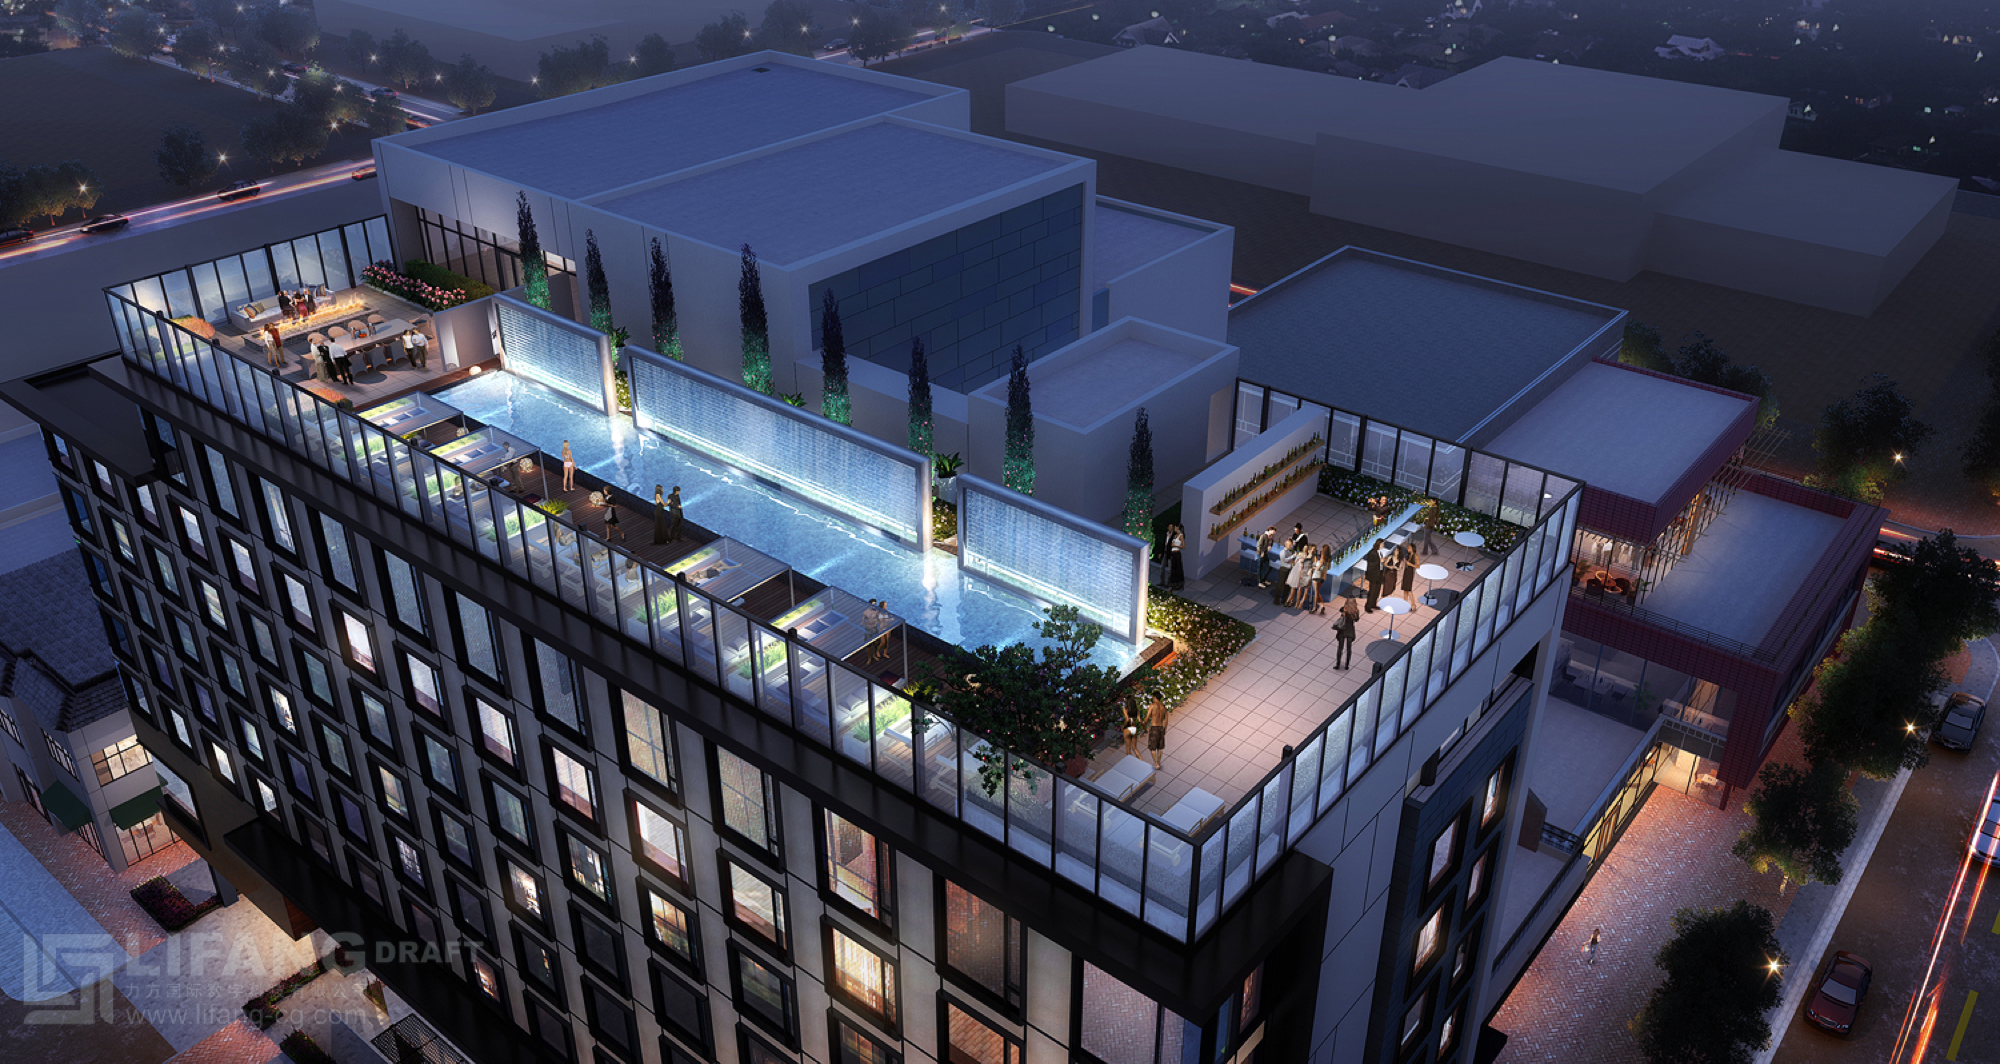 Dorfman will lead the new Autograph Collection hotel which is owned and operated by Denver-based Stonebridge Companies